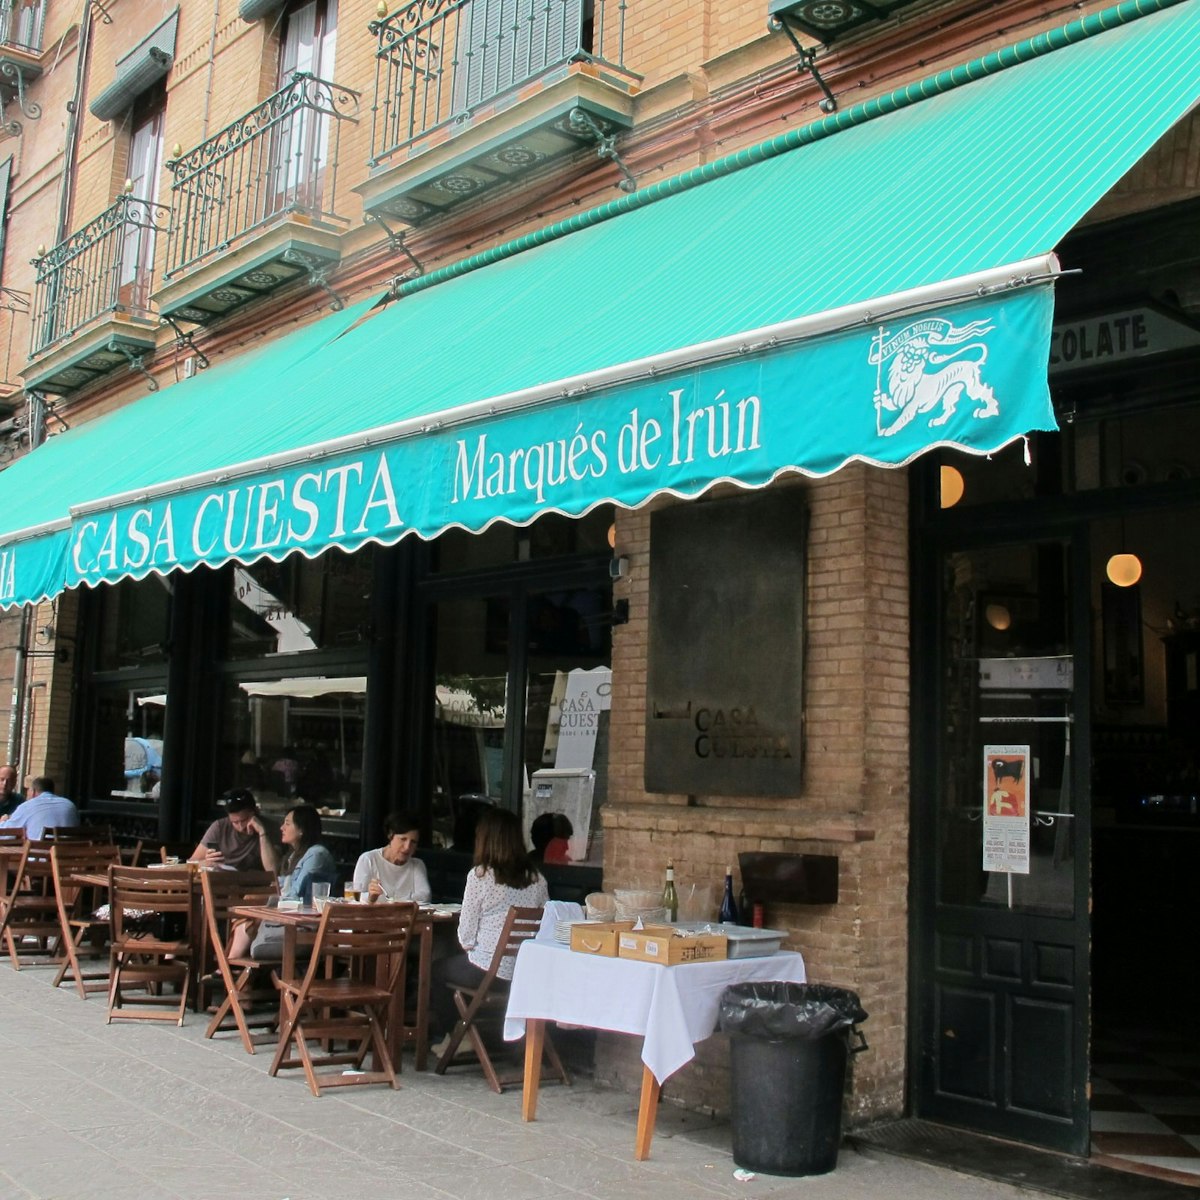 Casa Cuesta restaurant awning with tables.